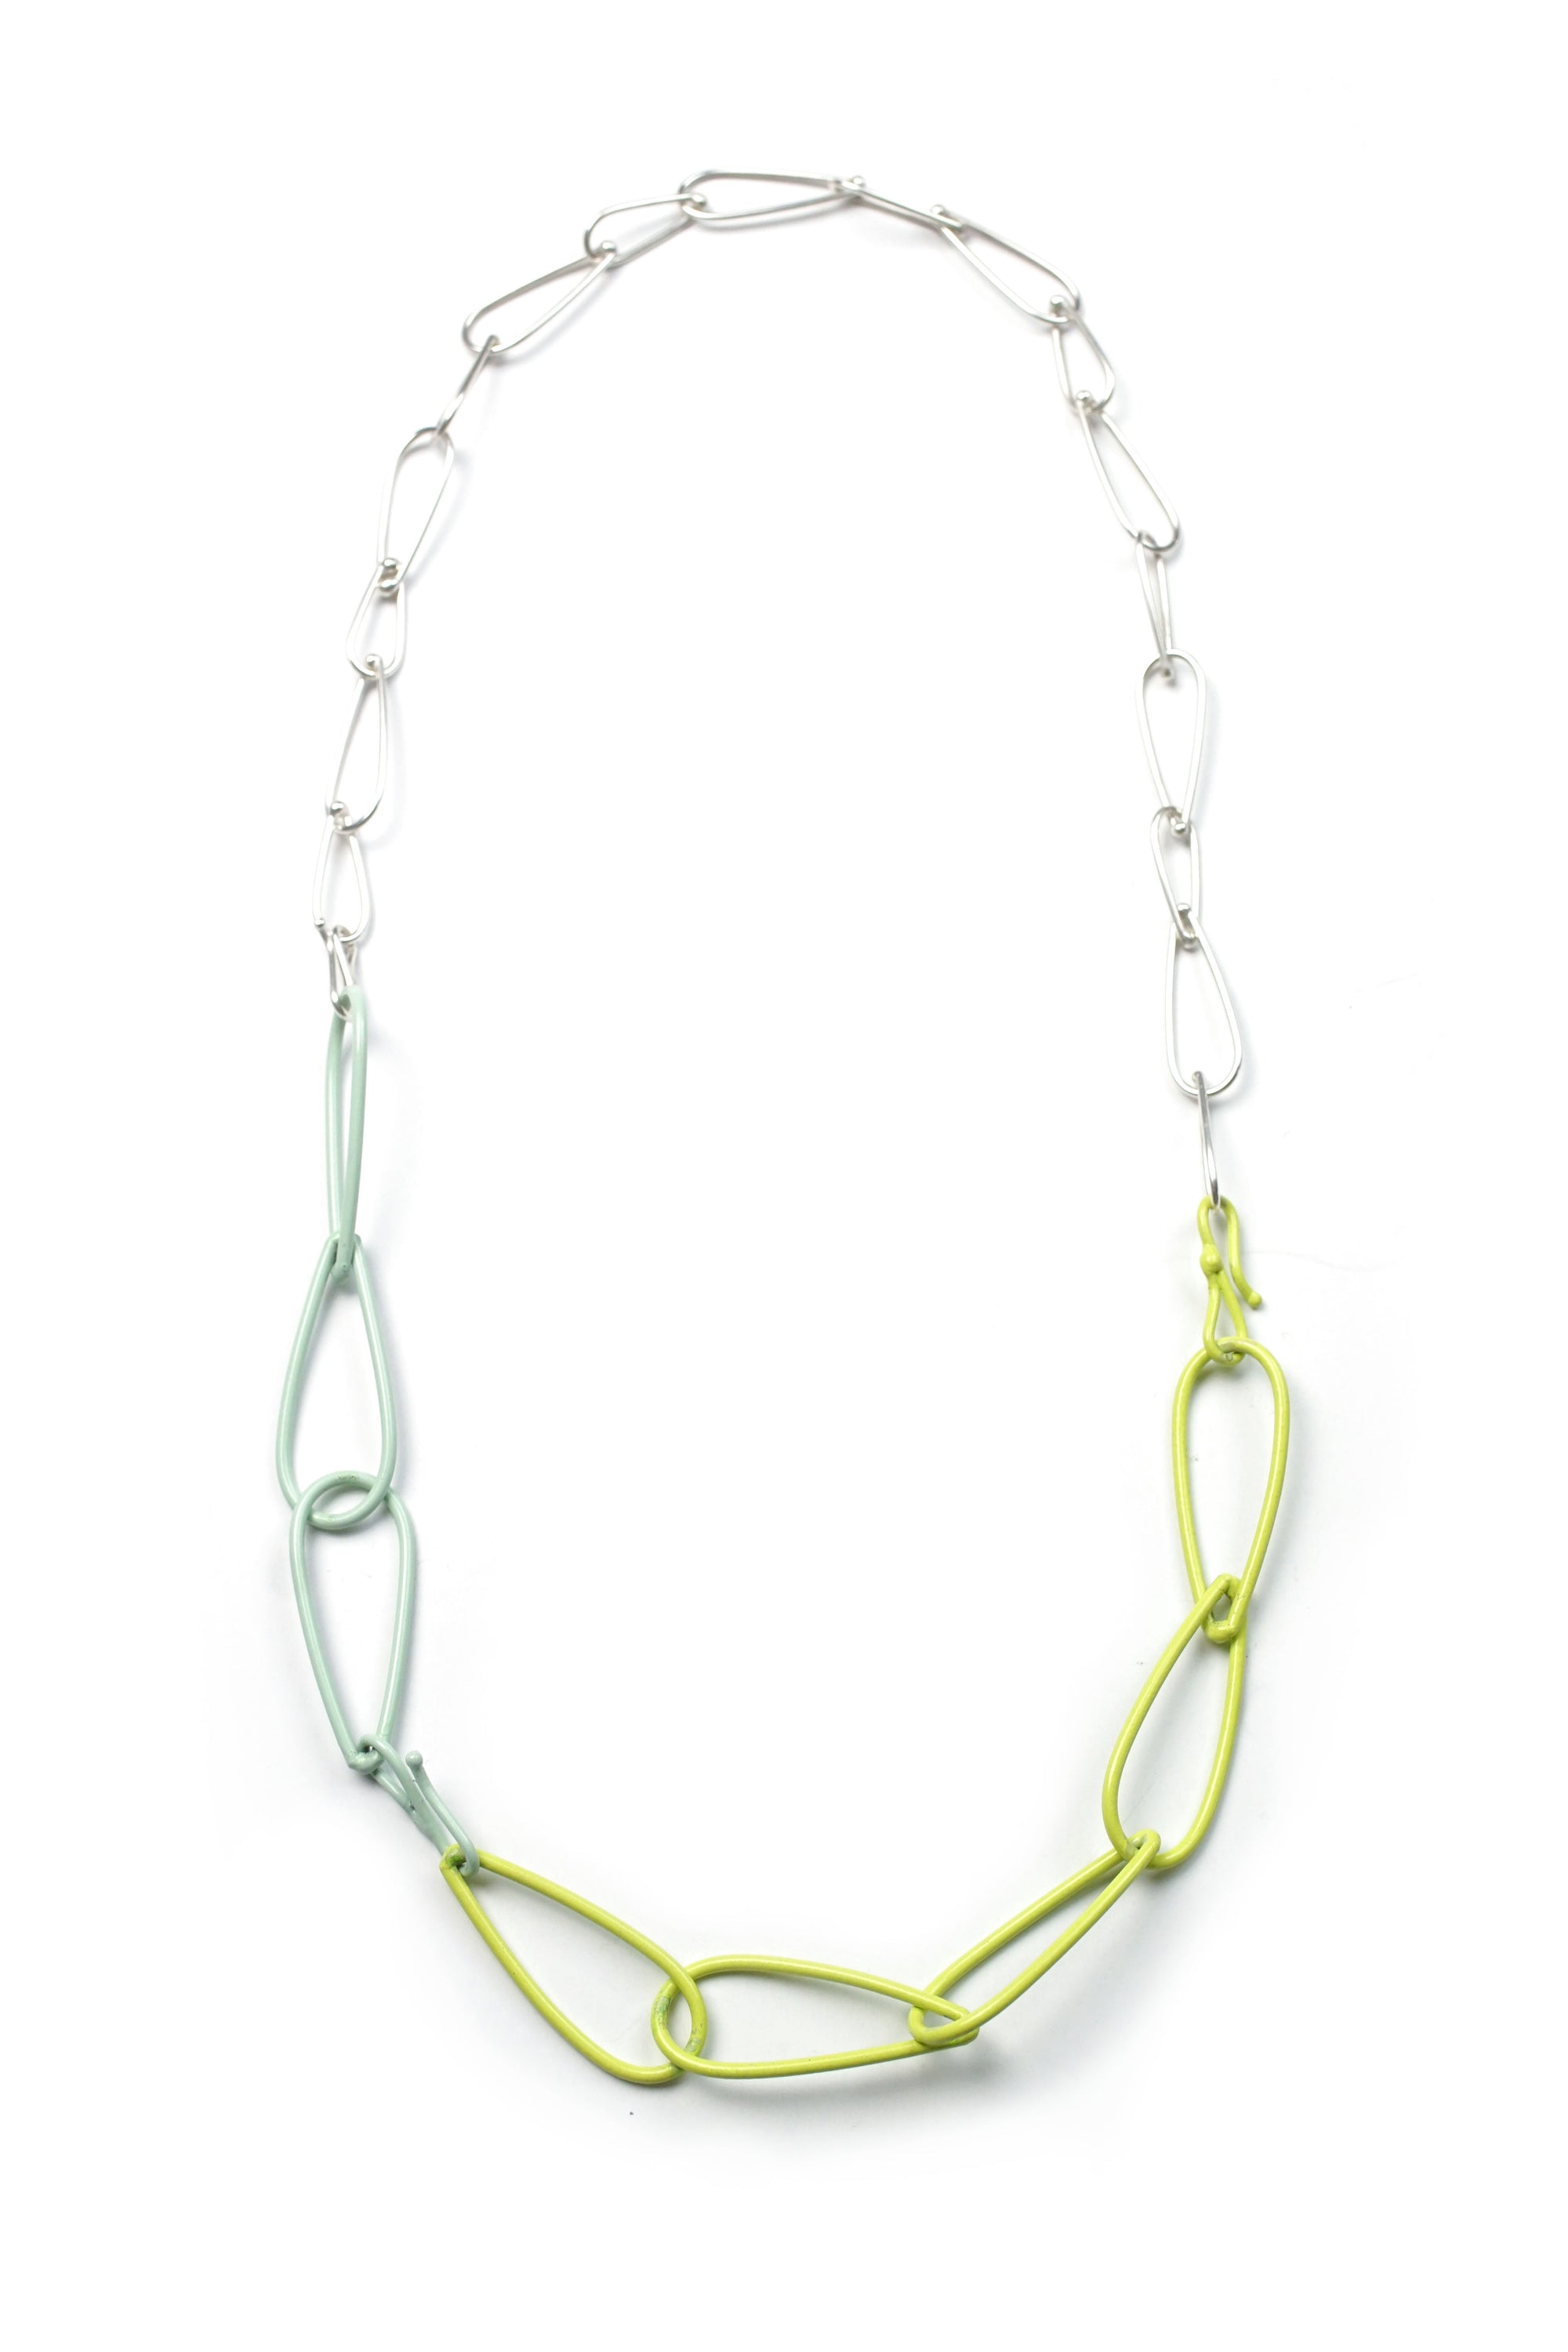 Modular Necklace in Silver, Neon Chartreuse, and Soft Mint